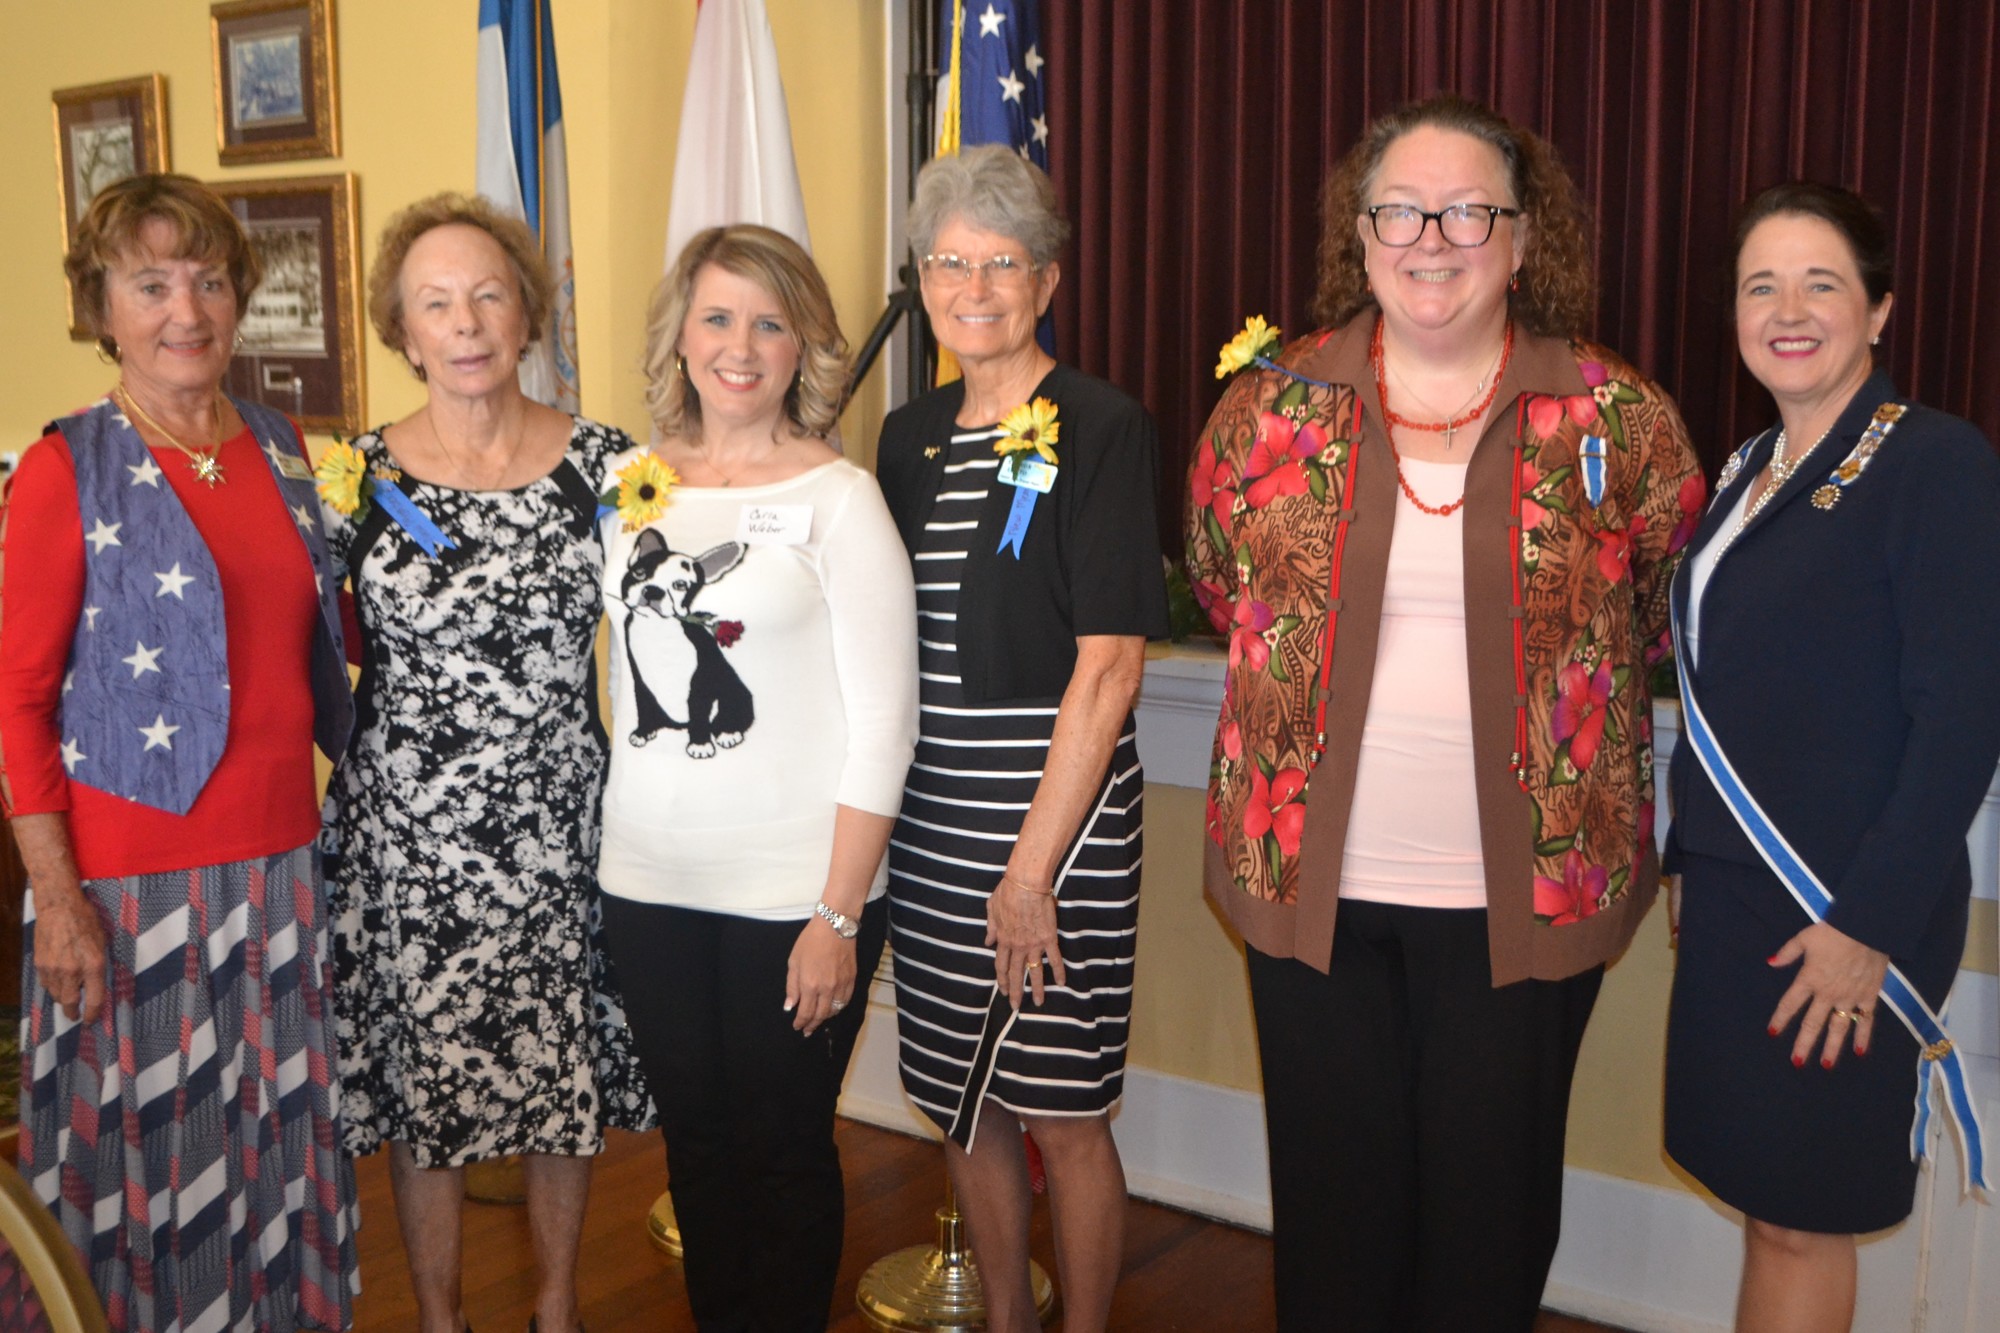 Beverly West, Susan Weis, Carla Weber, Sharon Lehto and J. P. Roush were inducted by Dawn Crumly Lemongello, Florida State Regent in November. Photo courtesy of Shirley Graham